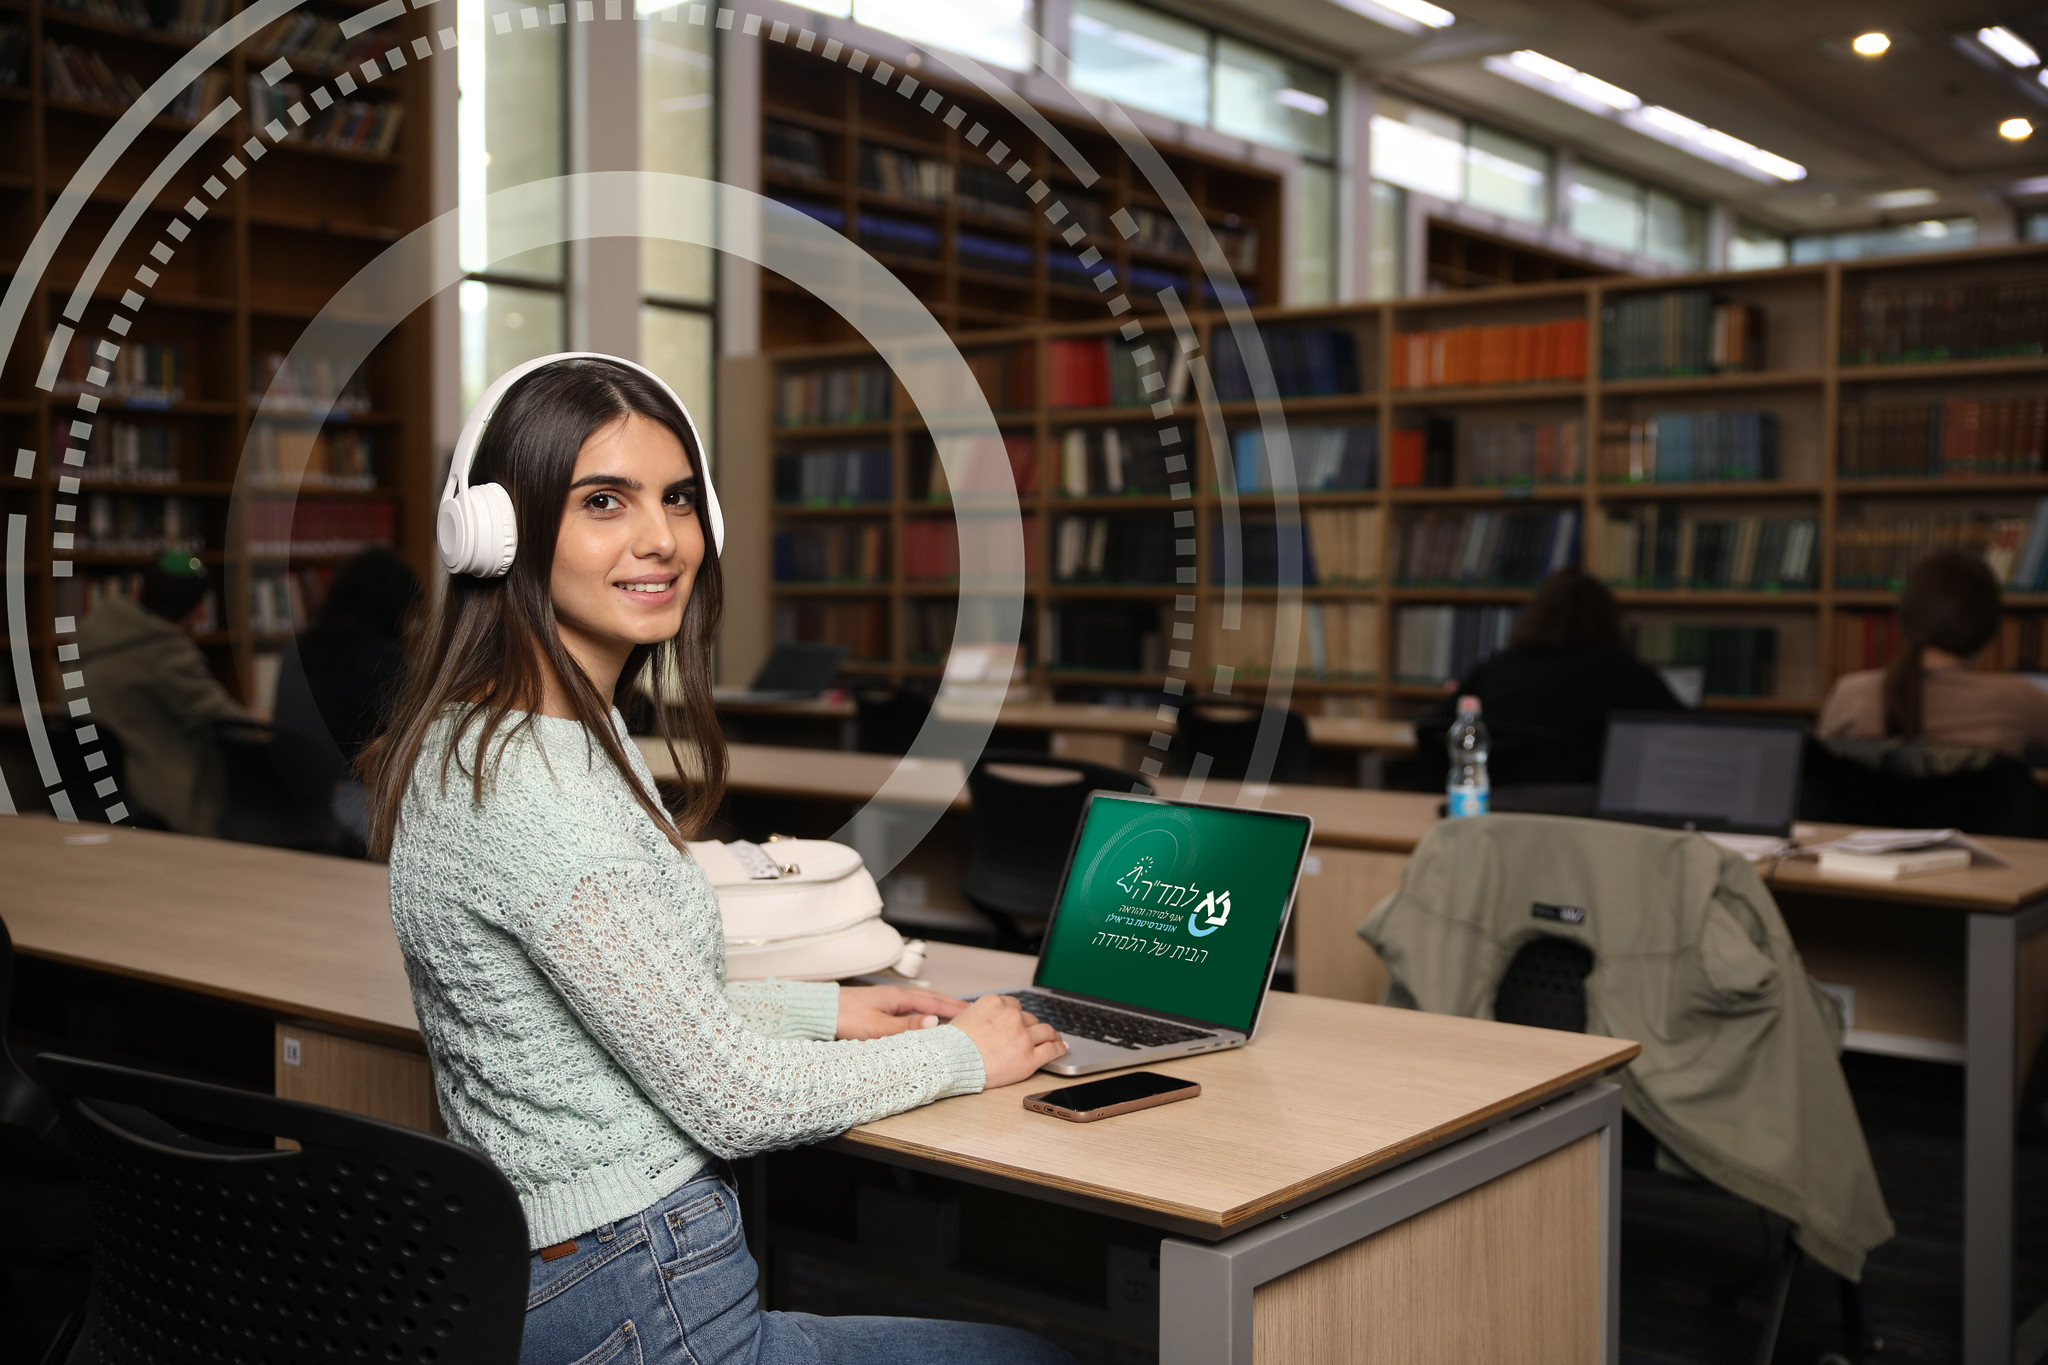 a female student sitting in a library wearing headphones. a laptop in front of her